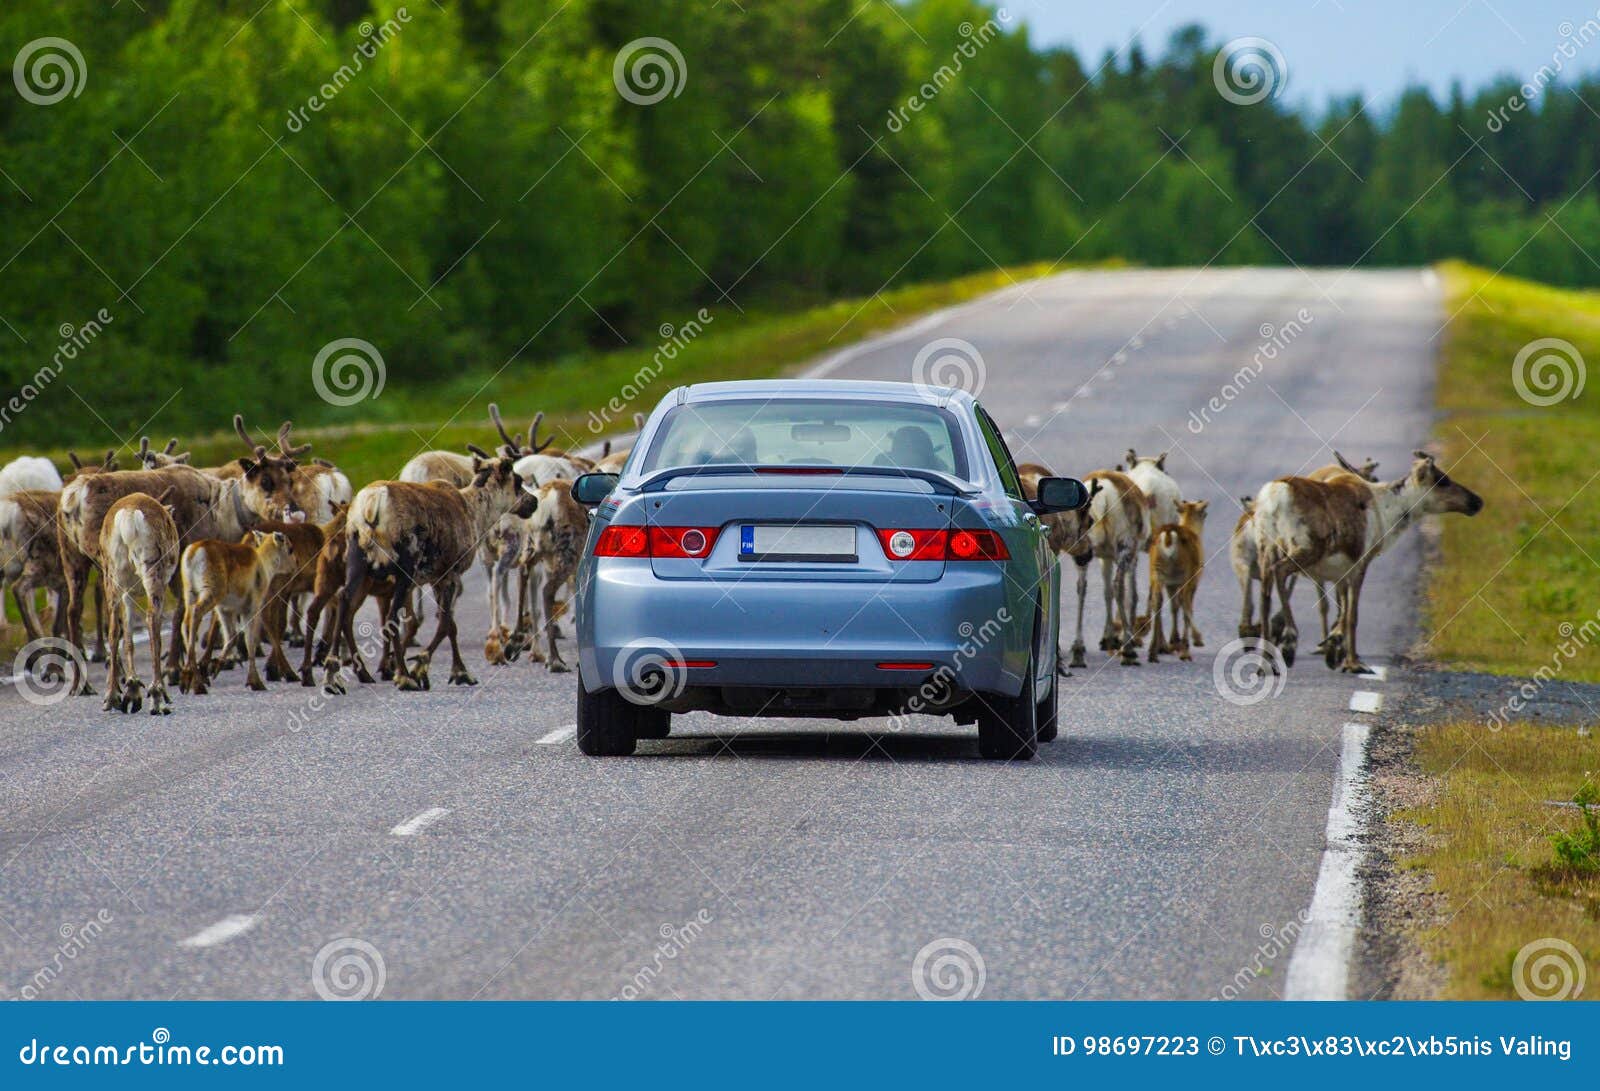 reindeer herd is stopping the car